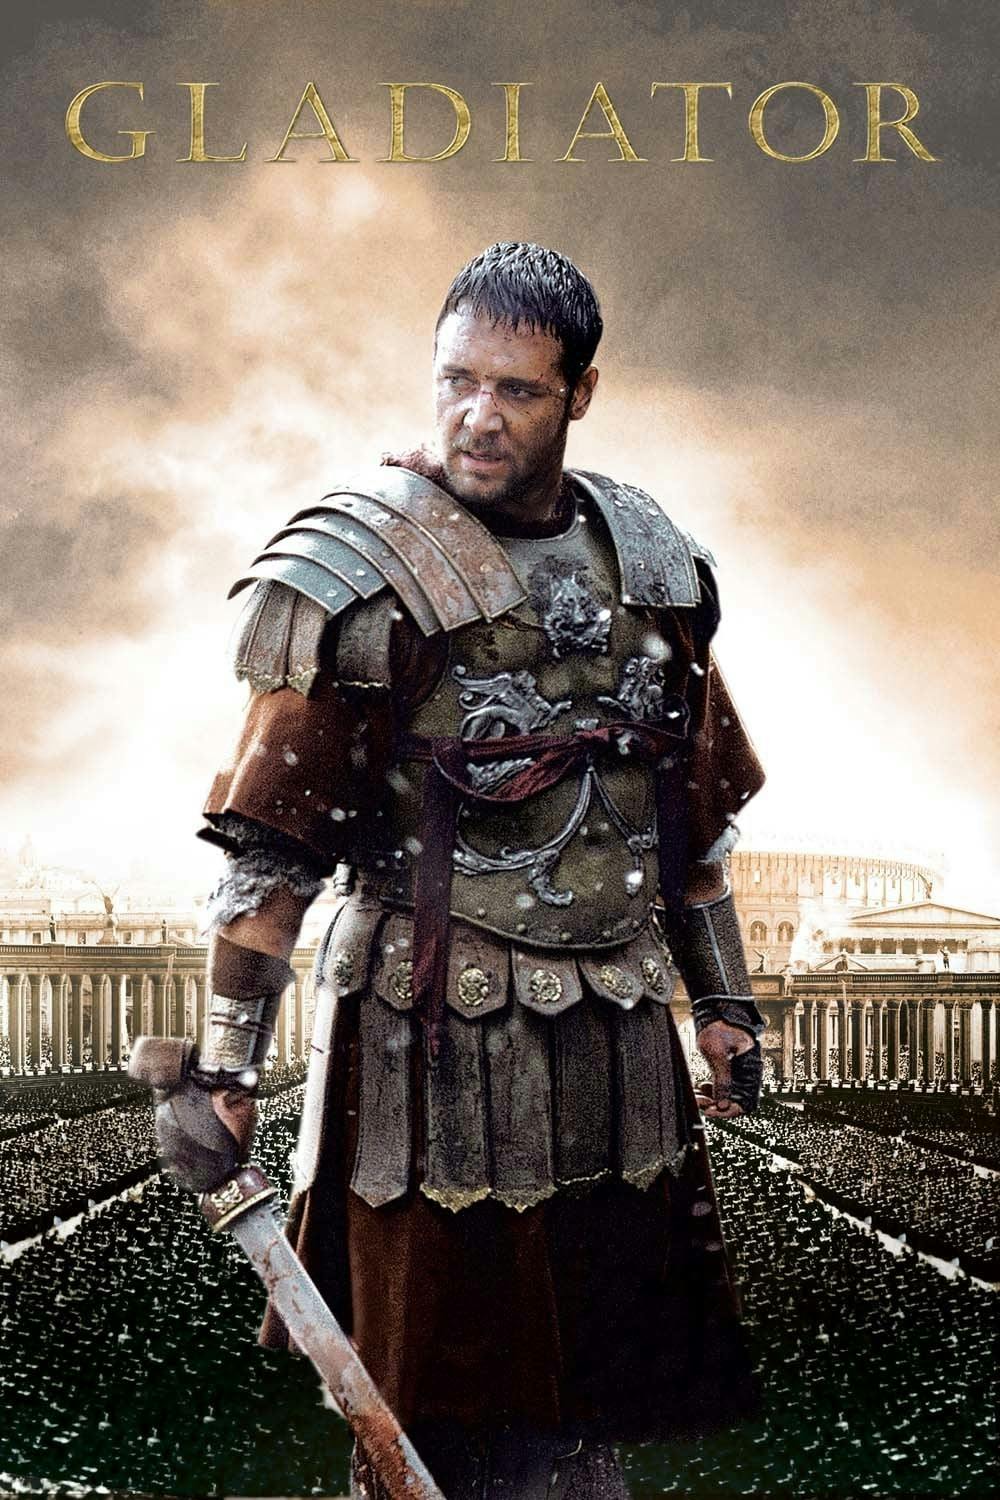 Best Russell Crowe movies to watch on Amazon or iTunes